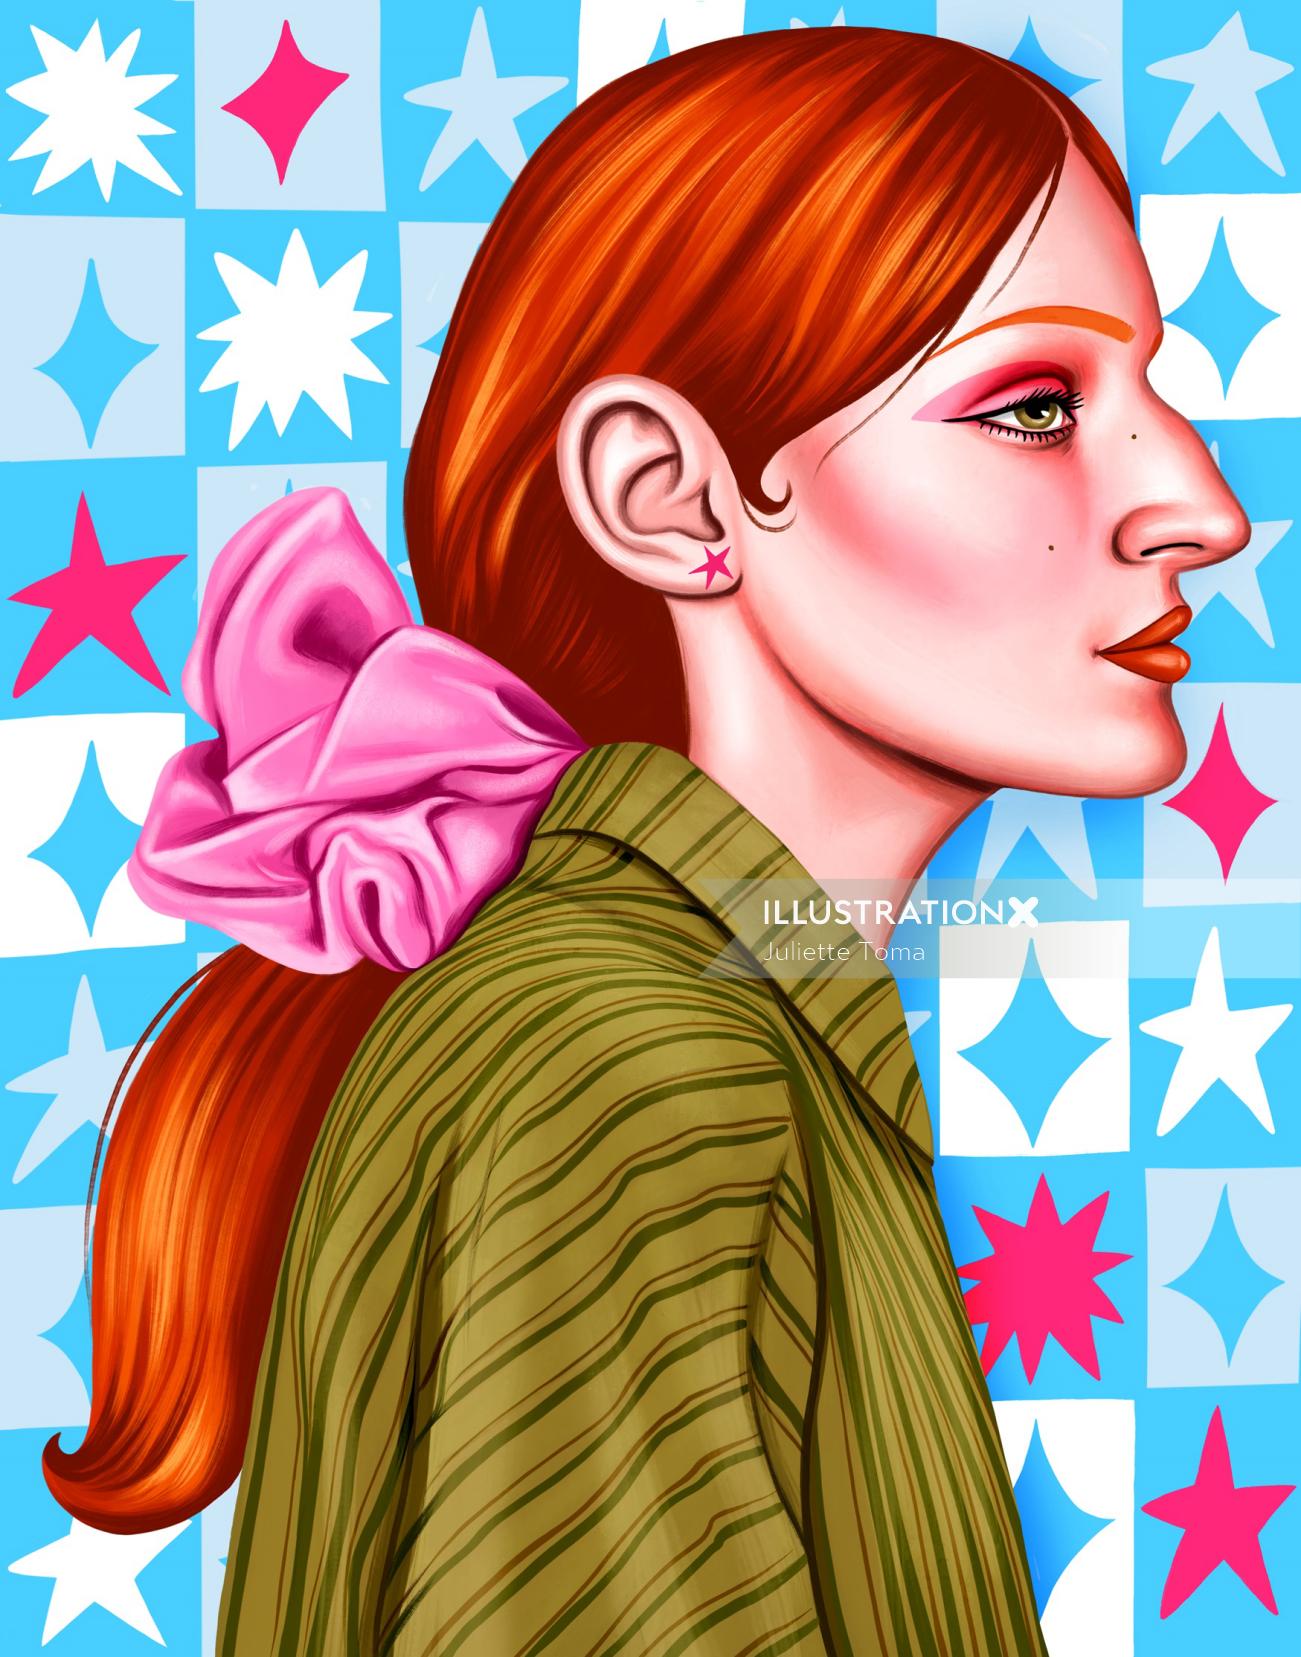 Depiction of a scrunchie girl